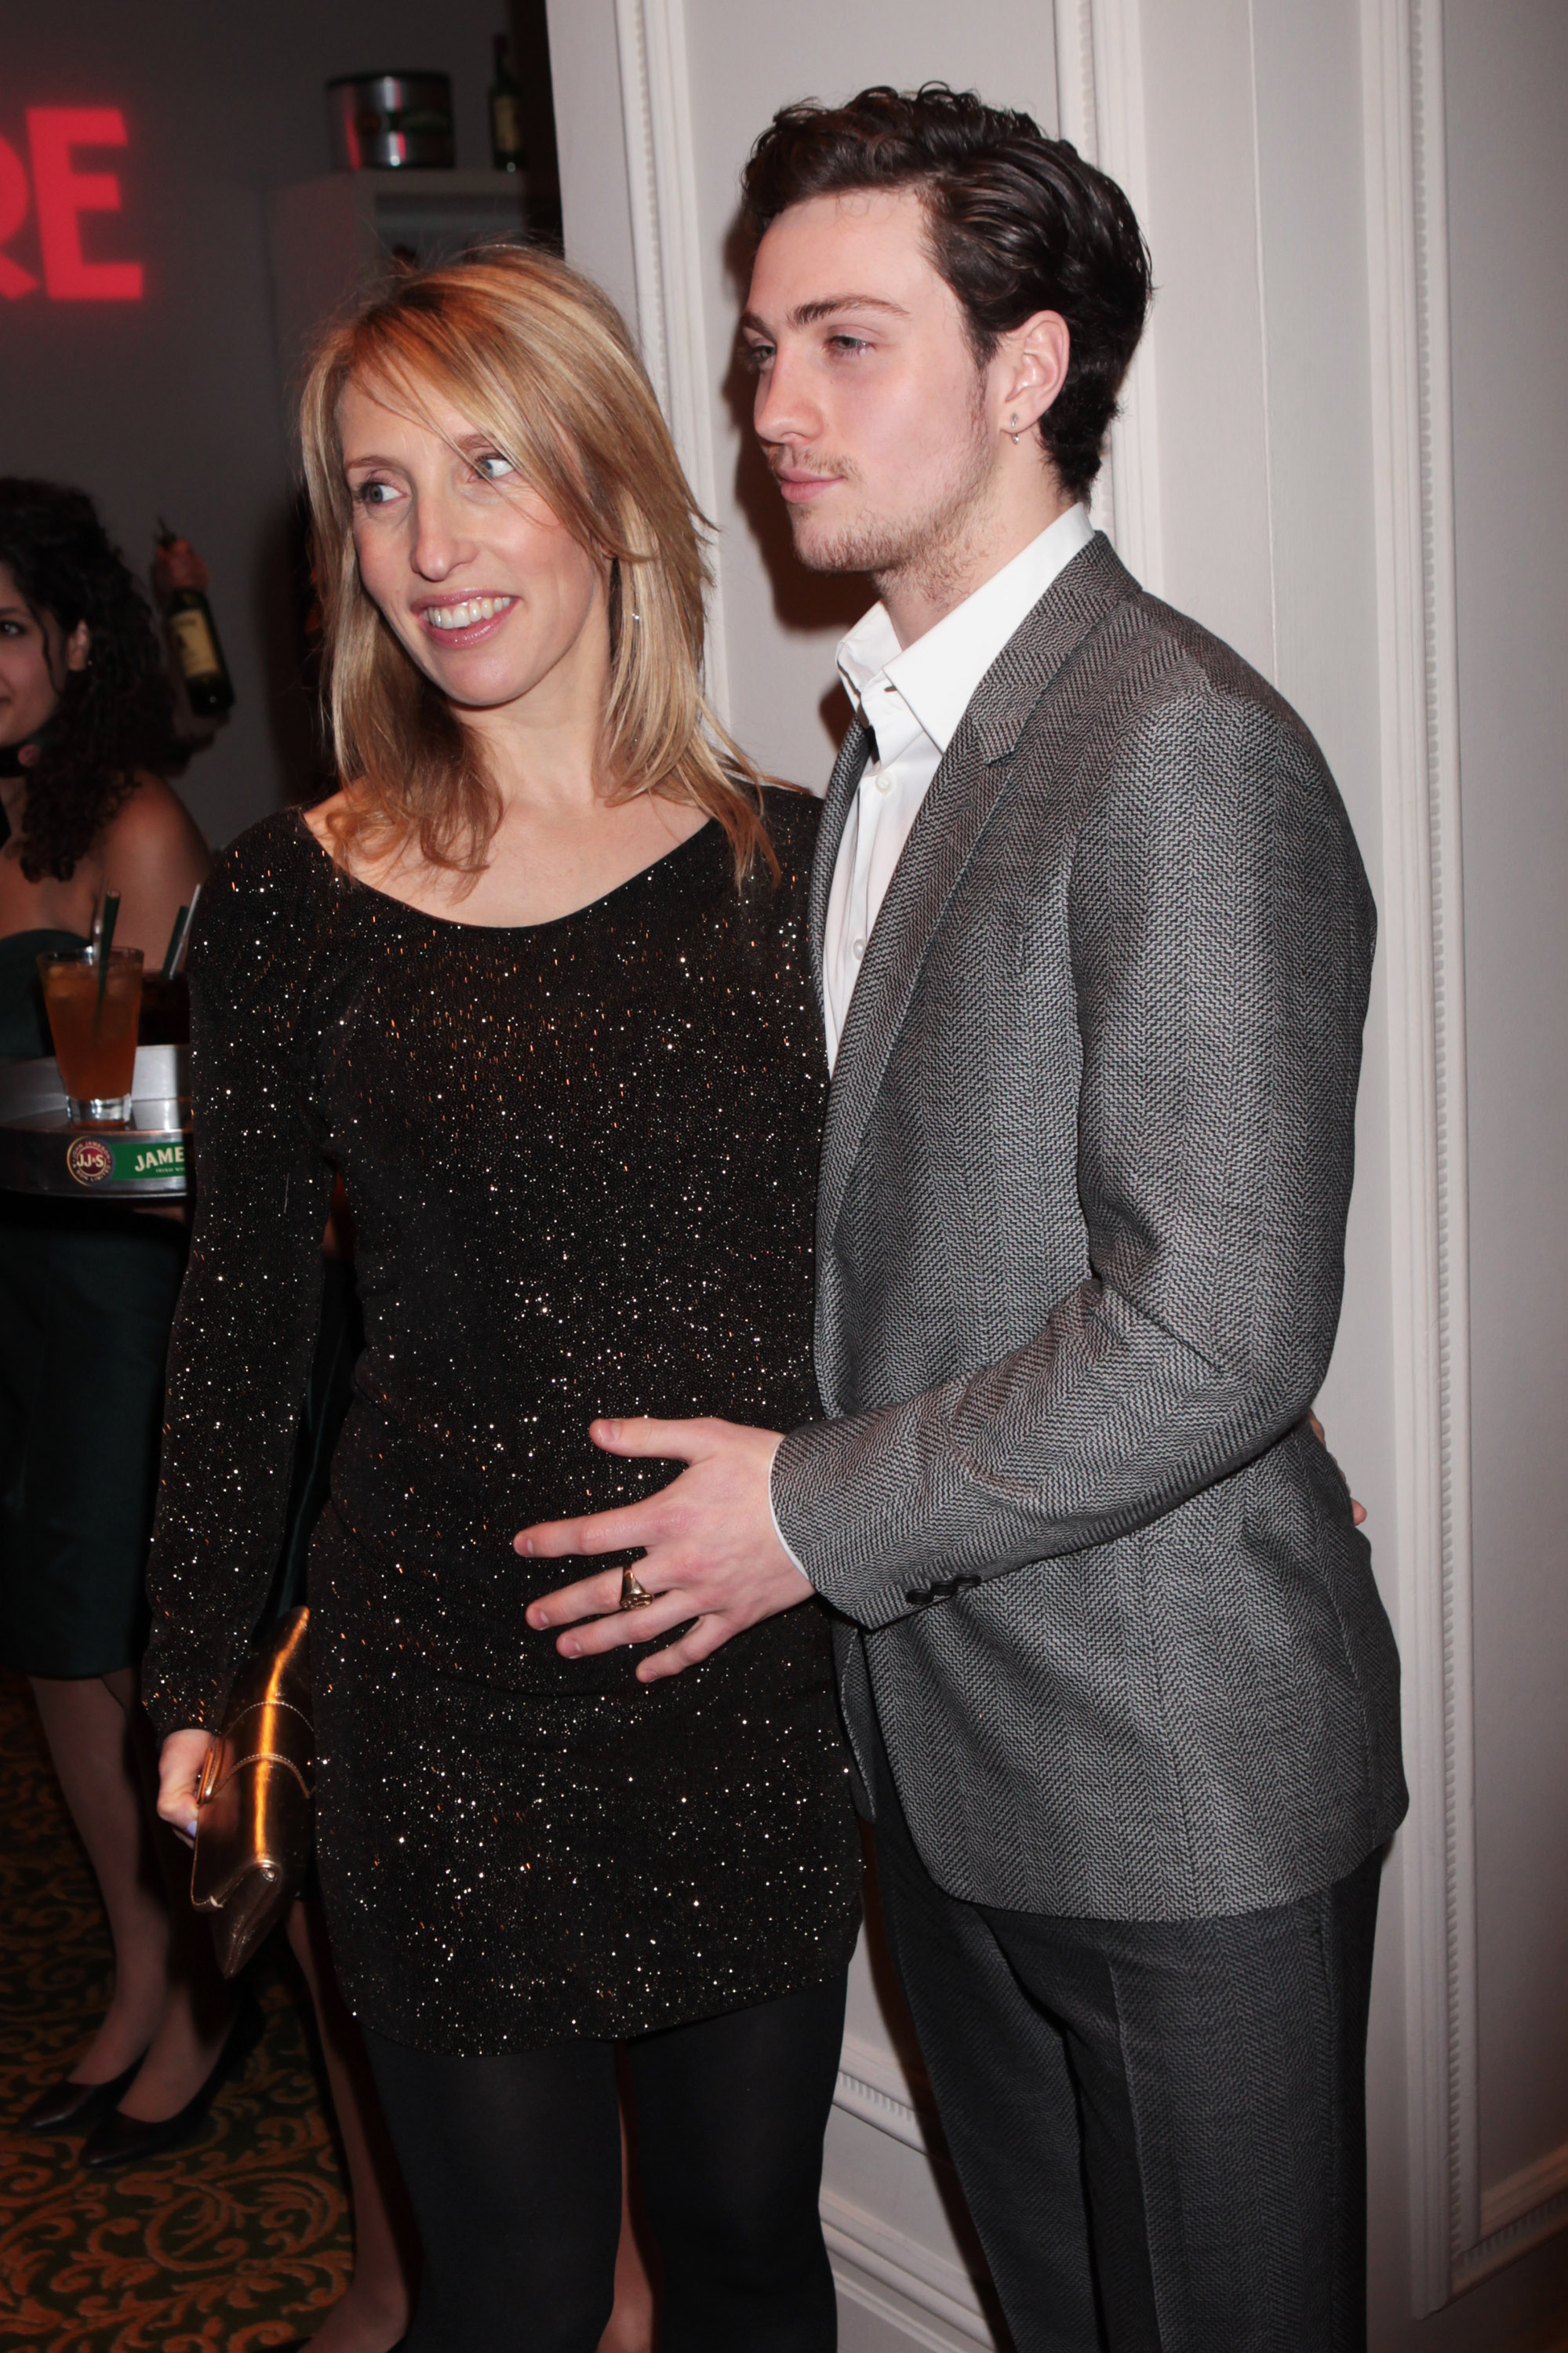 Sam and Aaron Taylor-Johnson at British Academy Film Awards in London in 2010 | Source: Getty Images